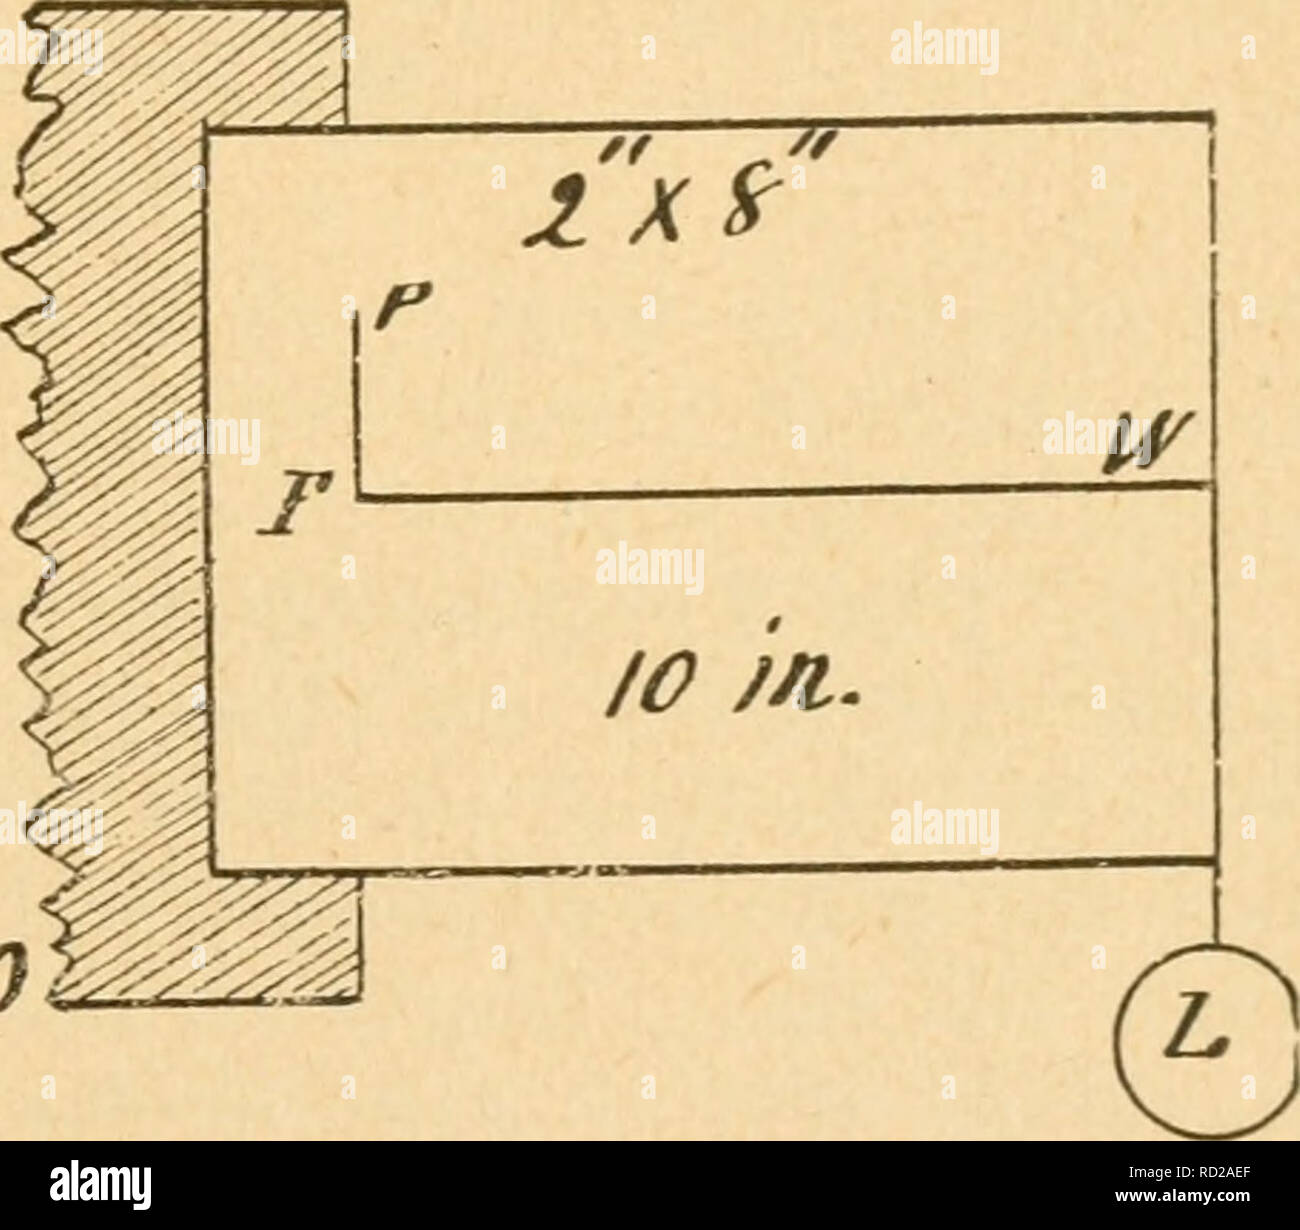 . Elementary lessons in the physics of agriculture. Agricultural physics. [from old catalog]. w tn. 14/. Ti^'JO In each of these cases the load draws lengthwise upon the upper half of the joist, acting through a weight-arm F. W. ten inches in length, to overcome the force of co- hesion at the fixed ends, whose strength, according to 69^ is ten thousand pounds per square inch, or a total of 2 X 2 X 10,000 lbs.=40,000 lbs. in the 2 x 4 joist, and of 2 X 4 x 10,000 lbs.=80,000 lbs. in the 2x8 joist. These two total strengths become powers acting through their respective power-arms F. P., whose me Stock Photo